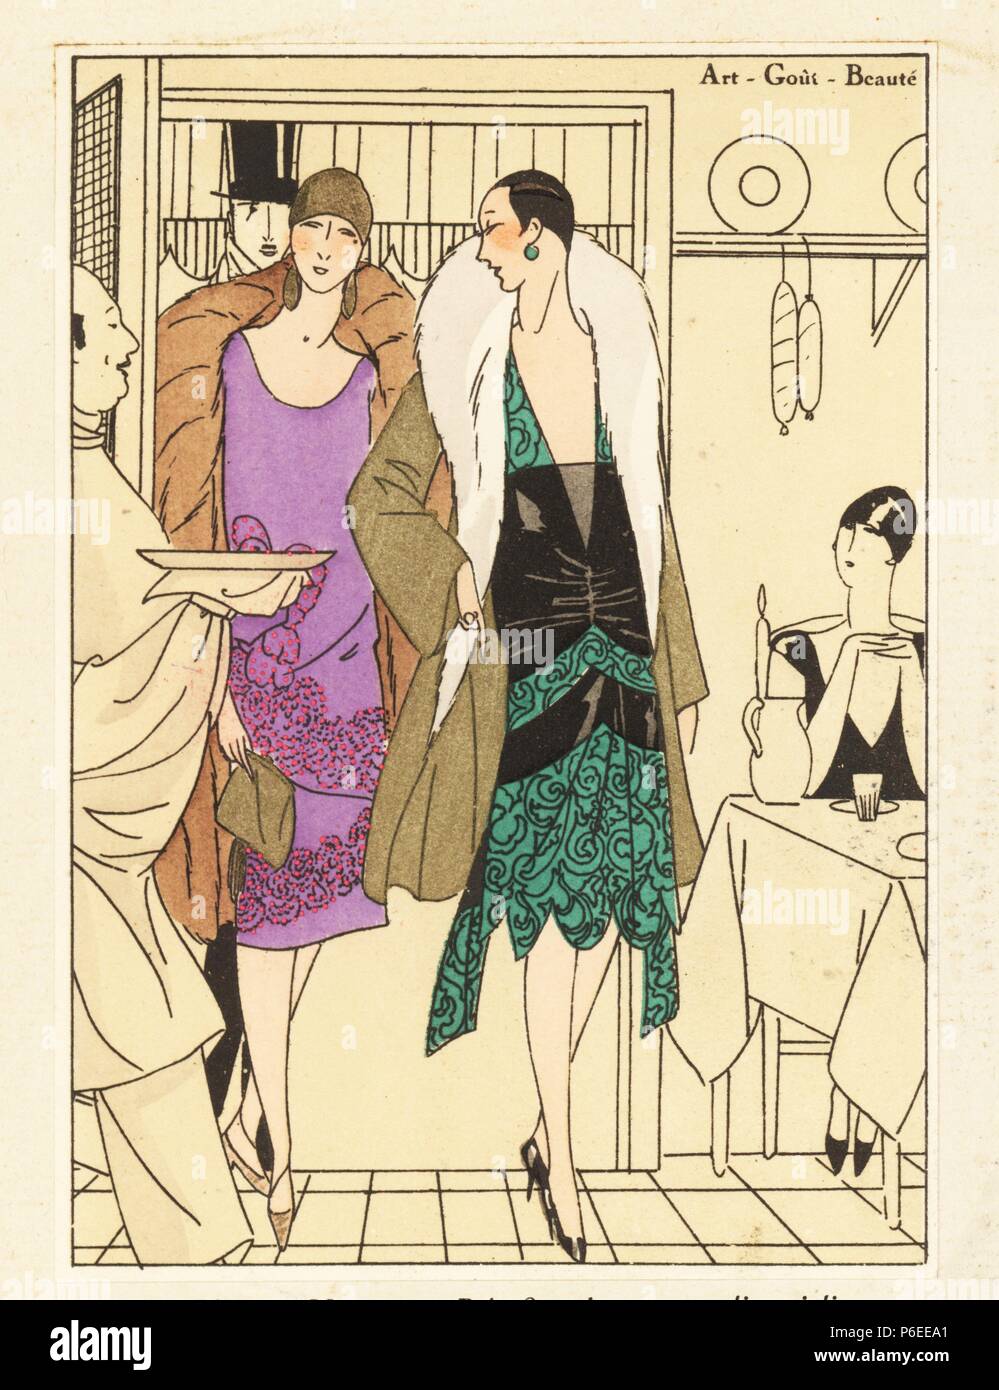 Two women entering a restaurant wearing evening dresses; one in lilac mousseline with embroidered flowers, and one in black crepe de chine with green lace. Lithograph with pochoir (stencil) handcolour from the luxury French fashion magazine 'Art, Gout, Beaute,' 1926. Stock Photo